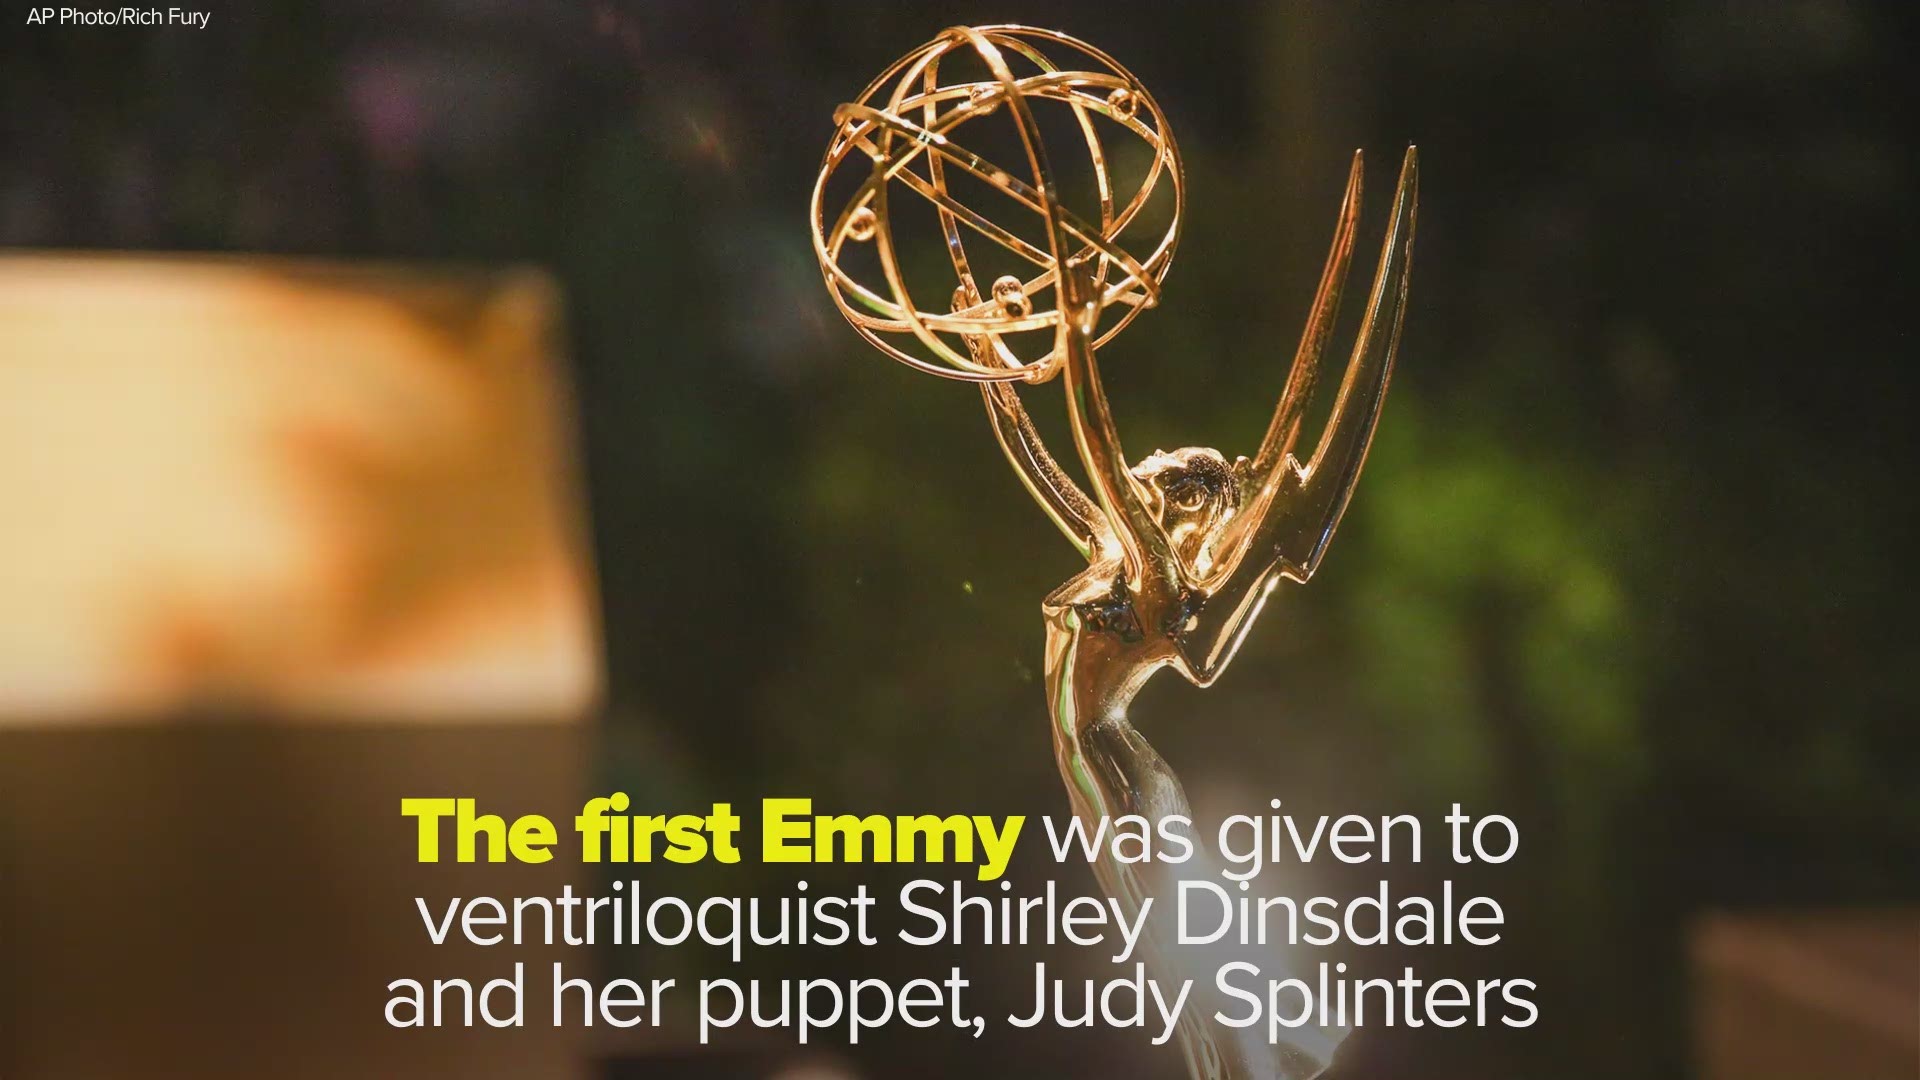 A look at some facts, some pretty obscure, about the Emmy Awards.